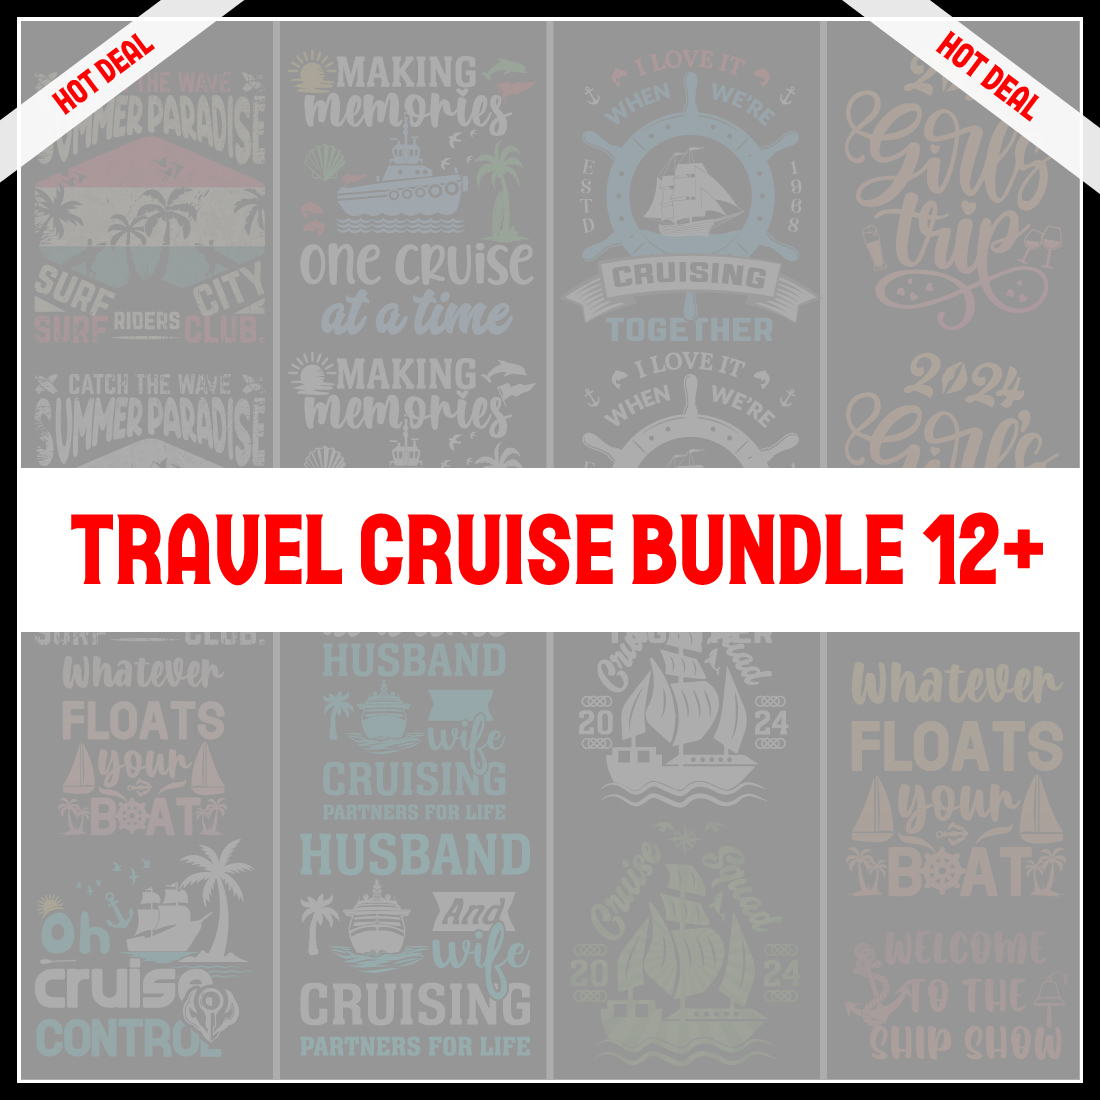 Cruise T-Shirt Design Best Bundle- Cruise T-shirt Design- Travel cruise vector, illustration, silhouette, or graphics cover image.